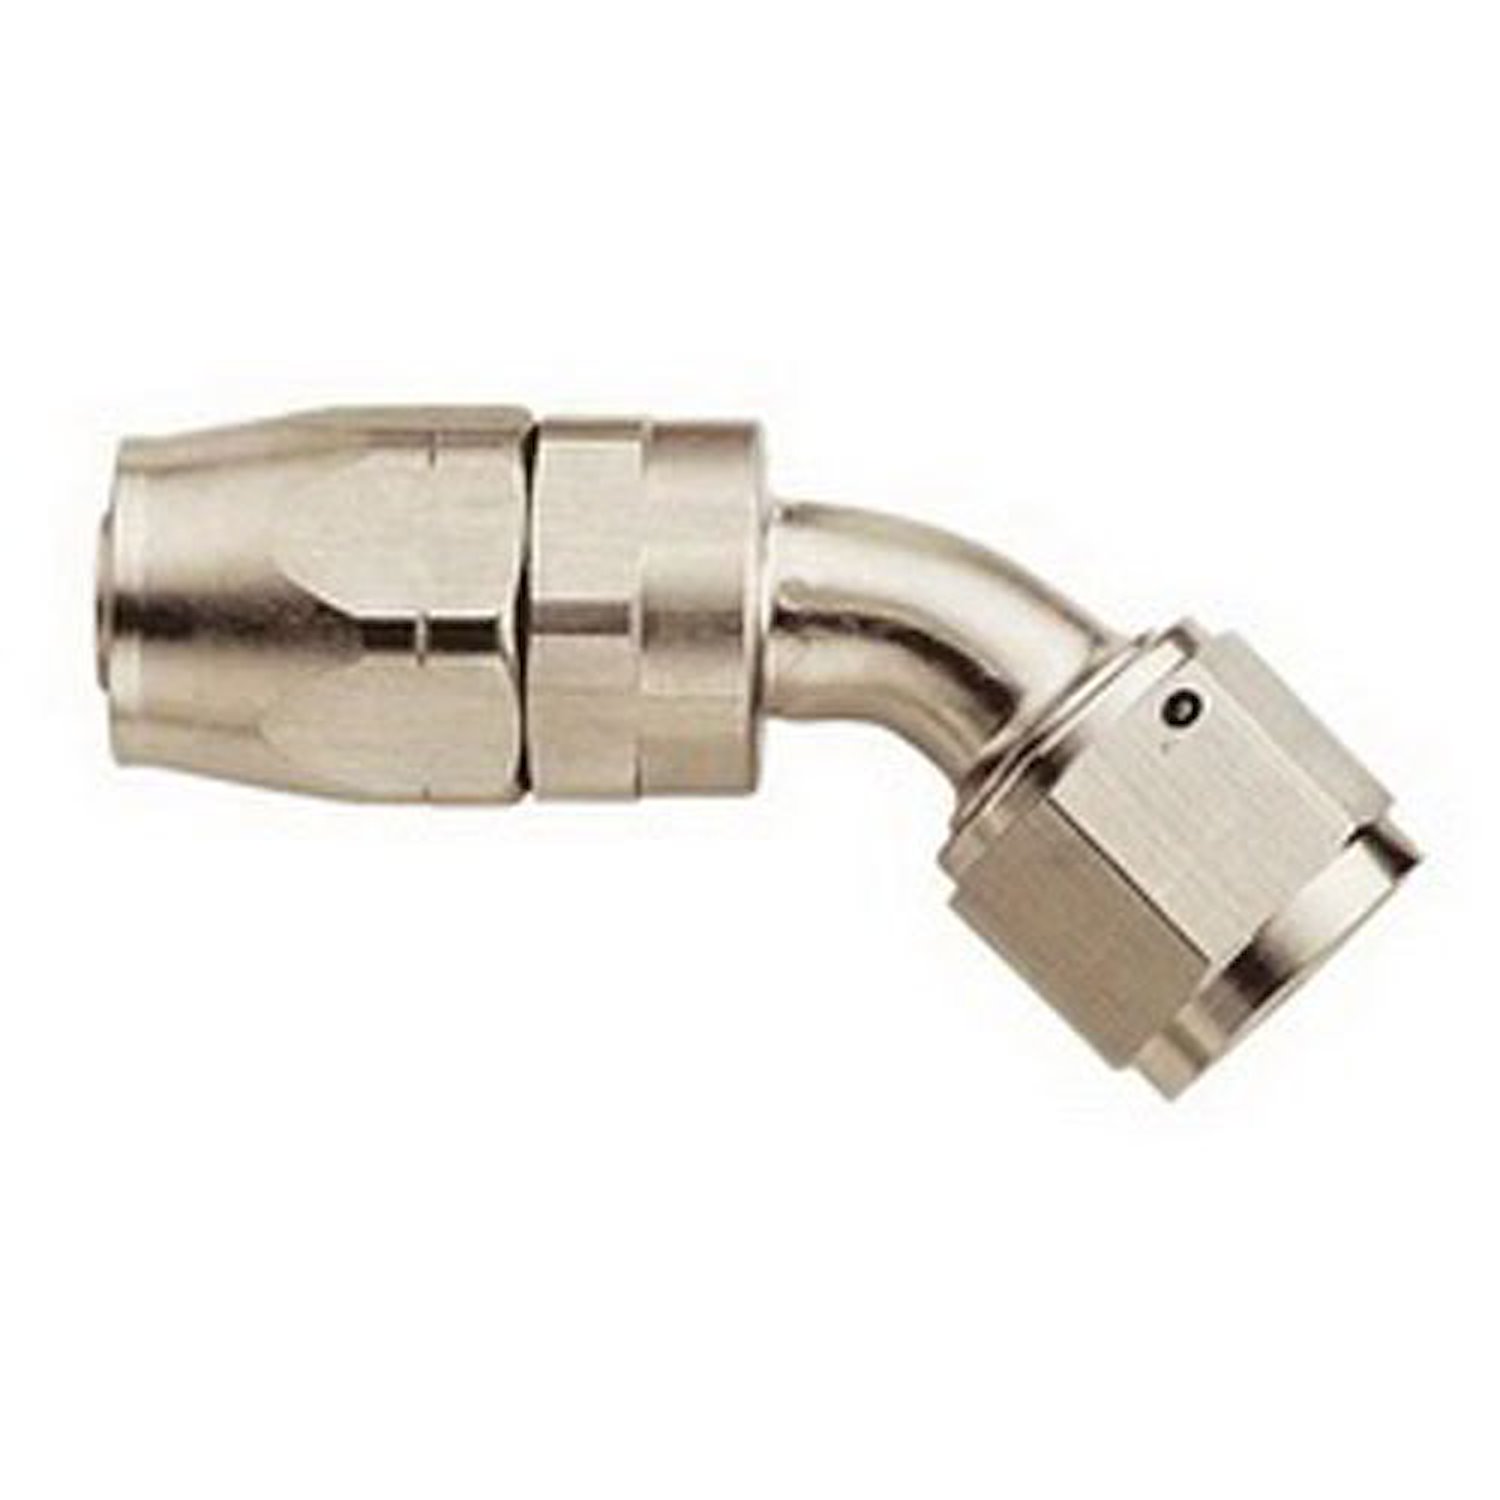 Aluminum Nickel-Plated Fitting -10AN Hose Size